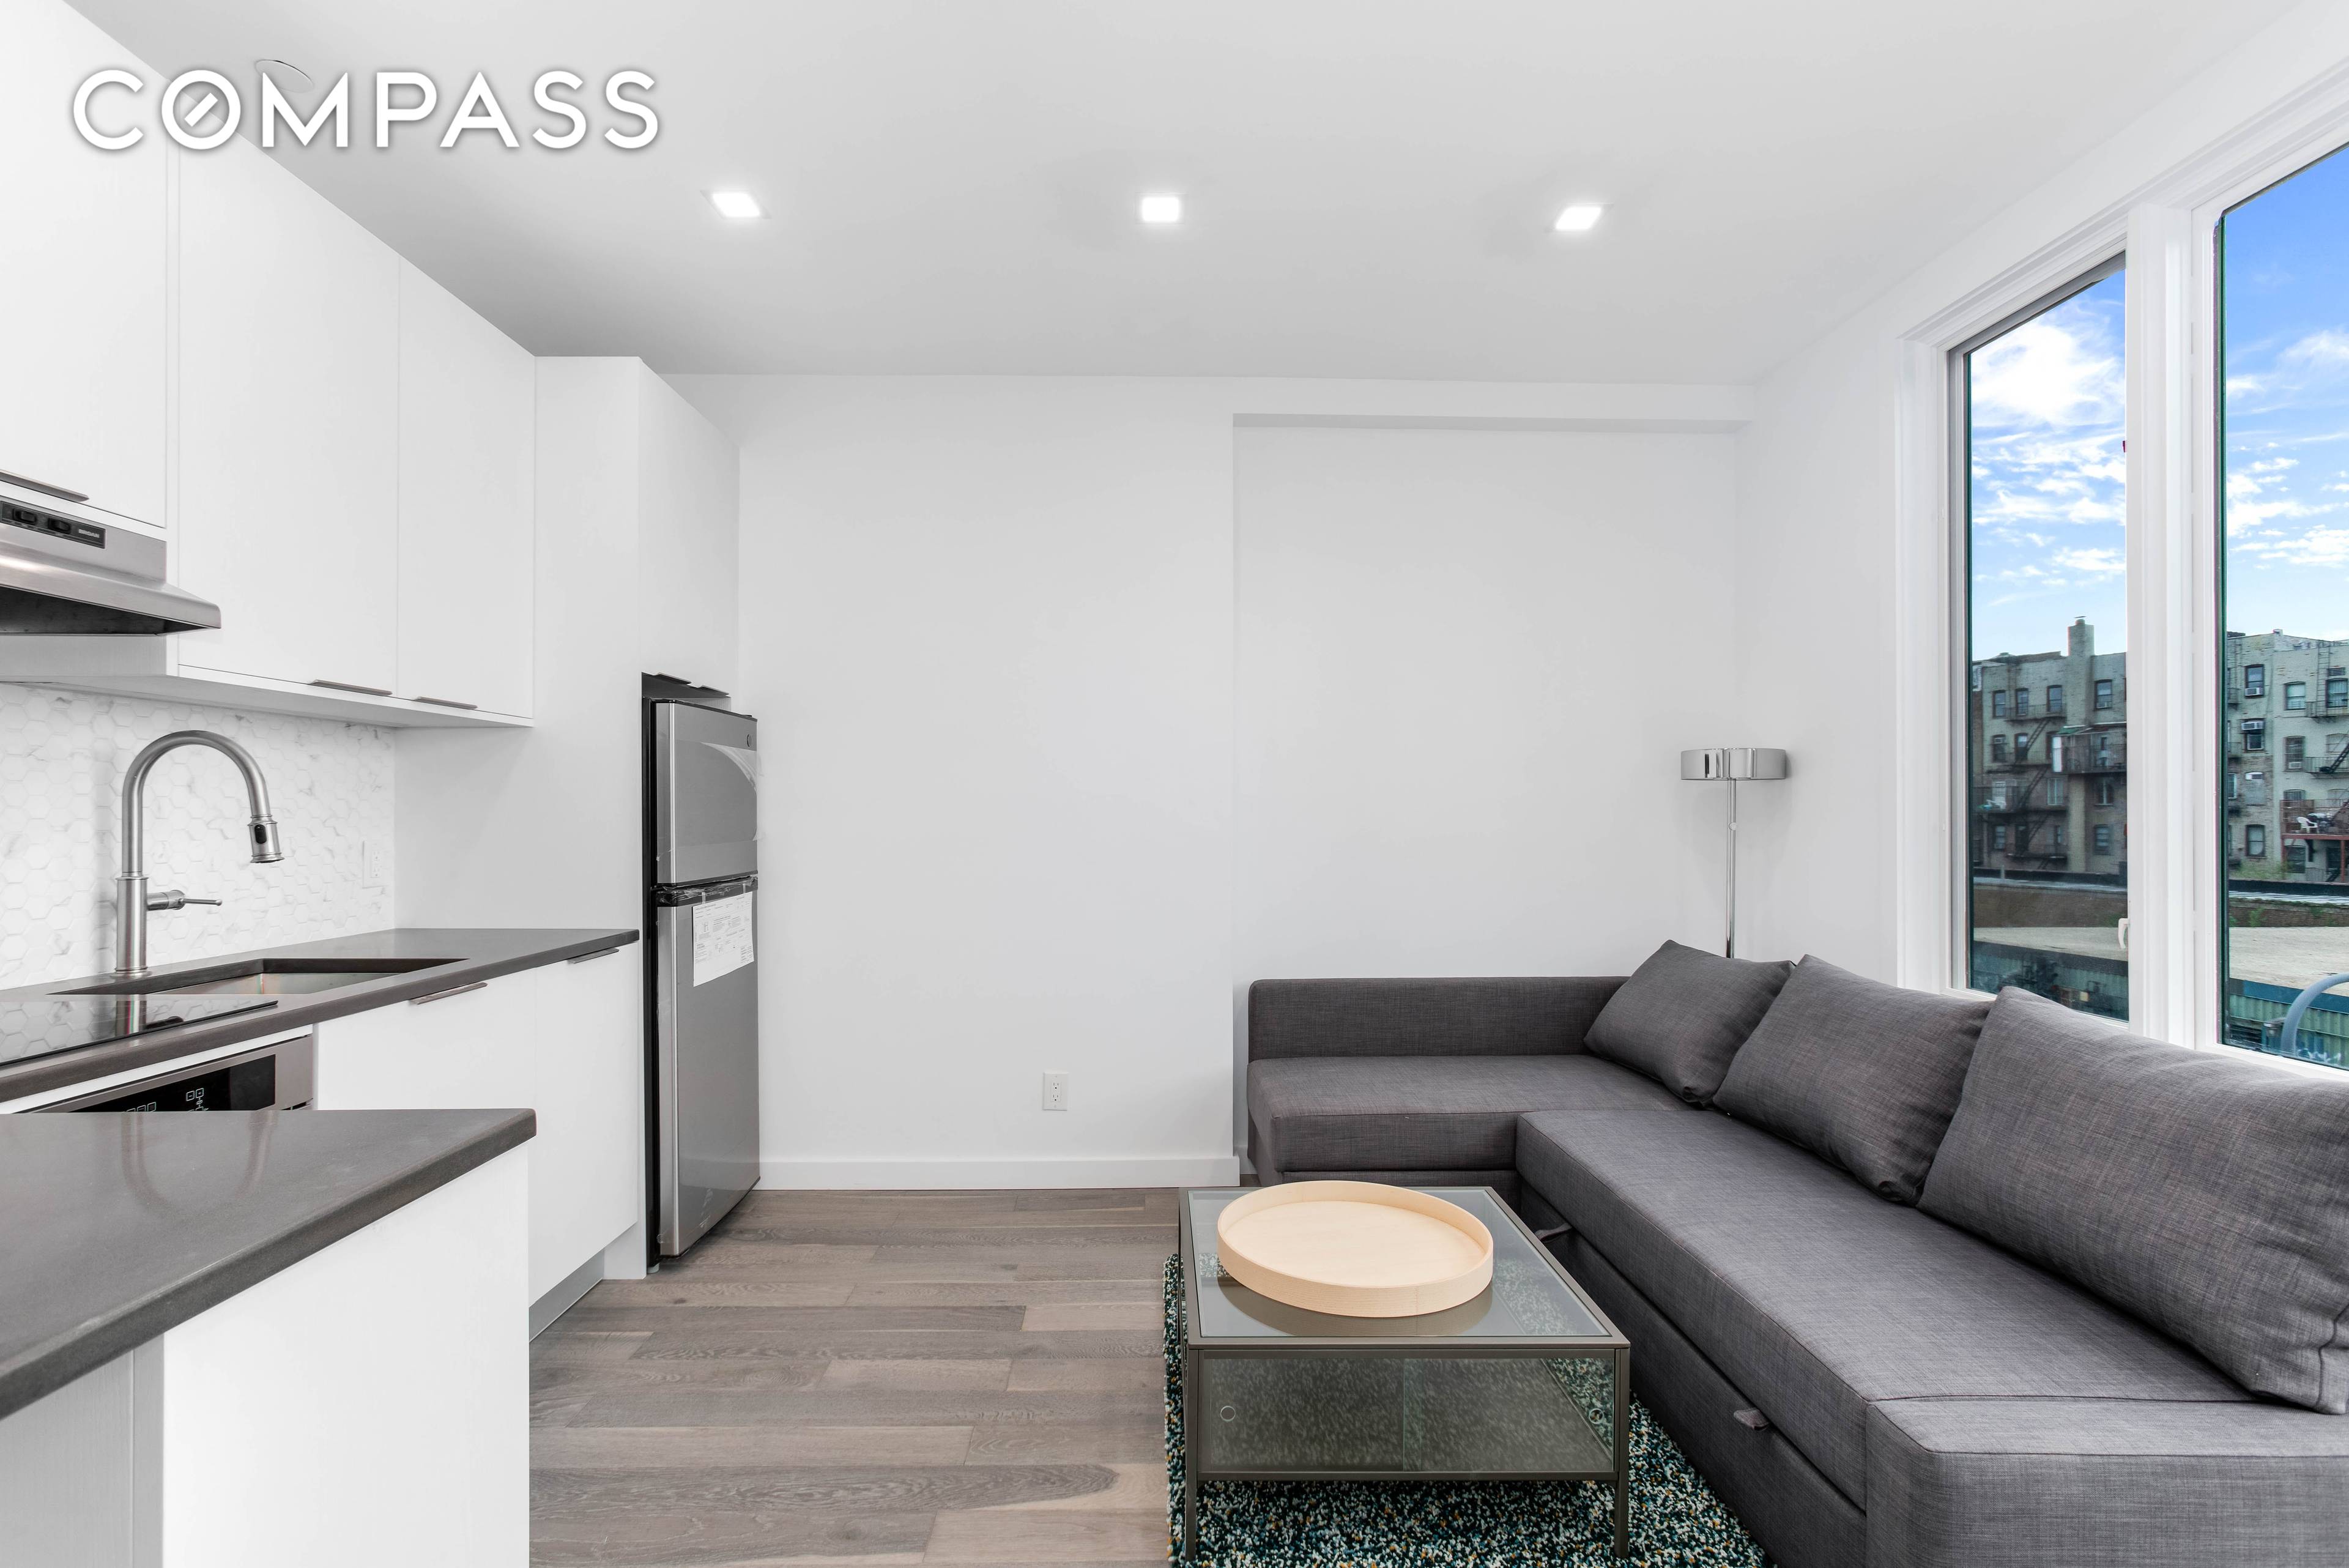 Williamsburg Elevator Building Newly Renovated 2BD 1BA Home with Balcony, Central Air, Hardwood Flooring, Loft like Ceilings, Sound Proof Windows, Chef s Kitchen with Integrated Appliances, Video Intercom and Roof ...